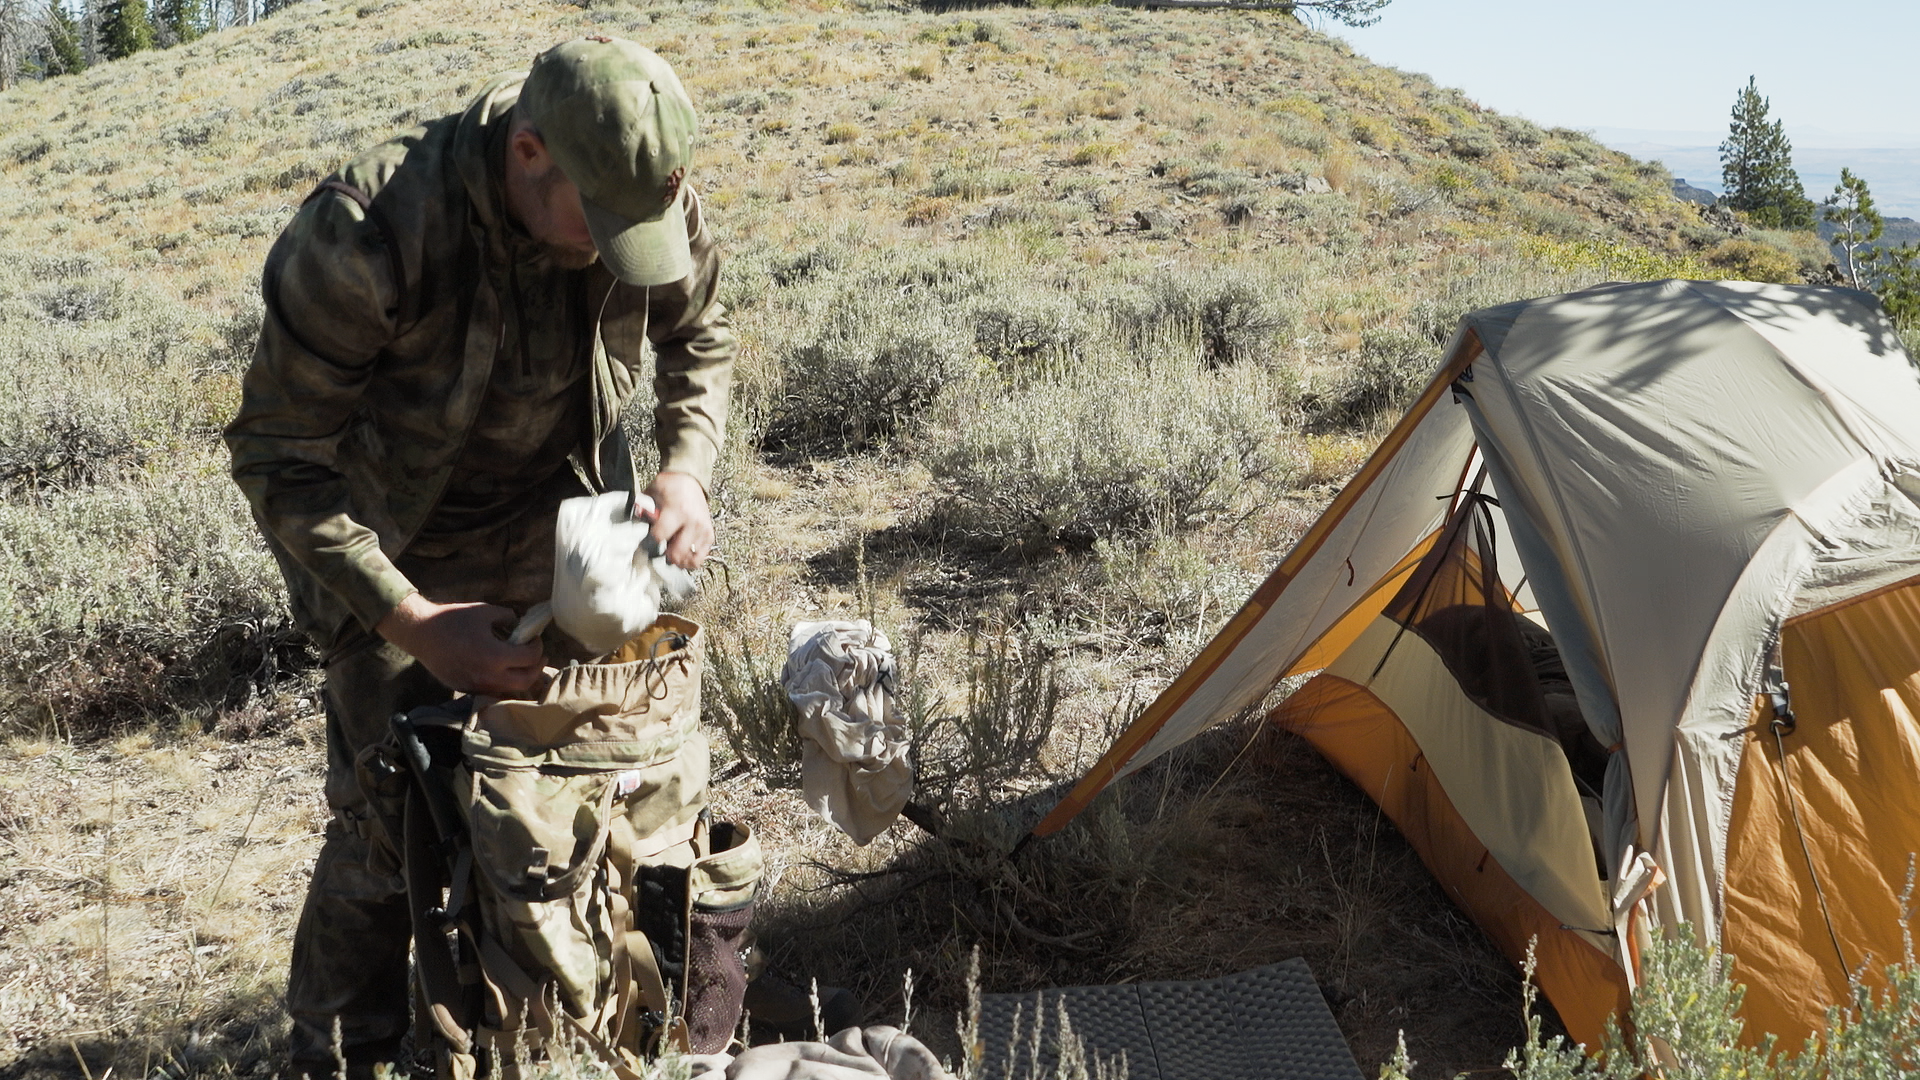 Nate packing all the items from his hunting gear list into his pack.